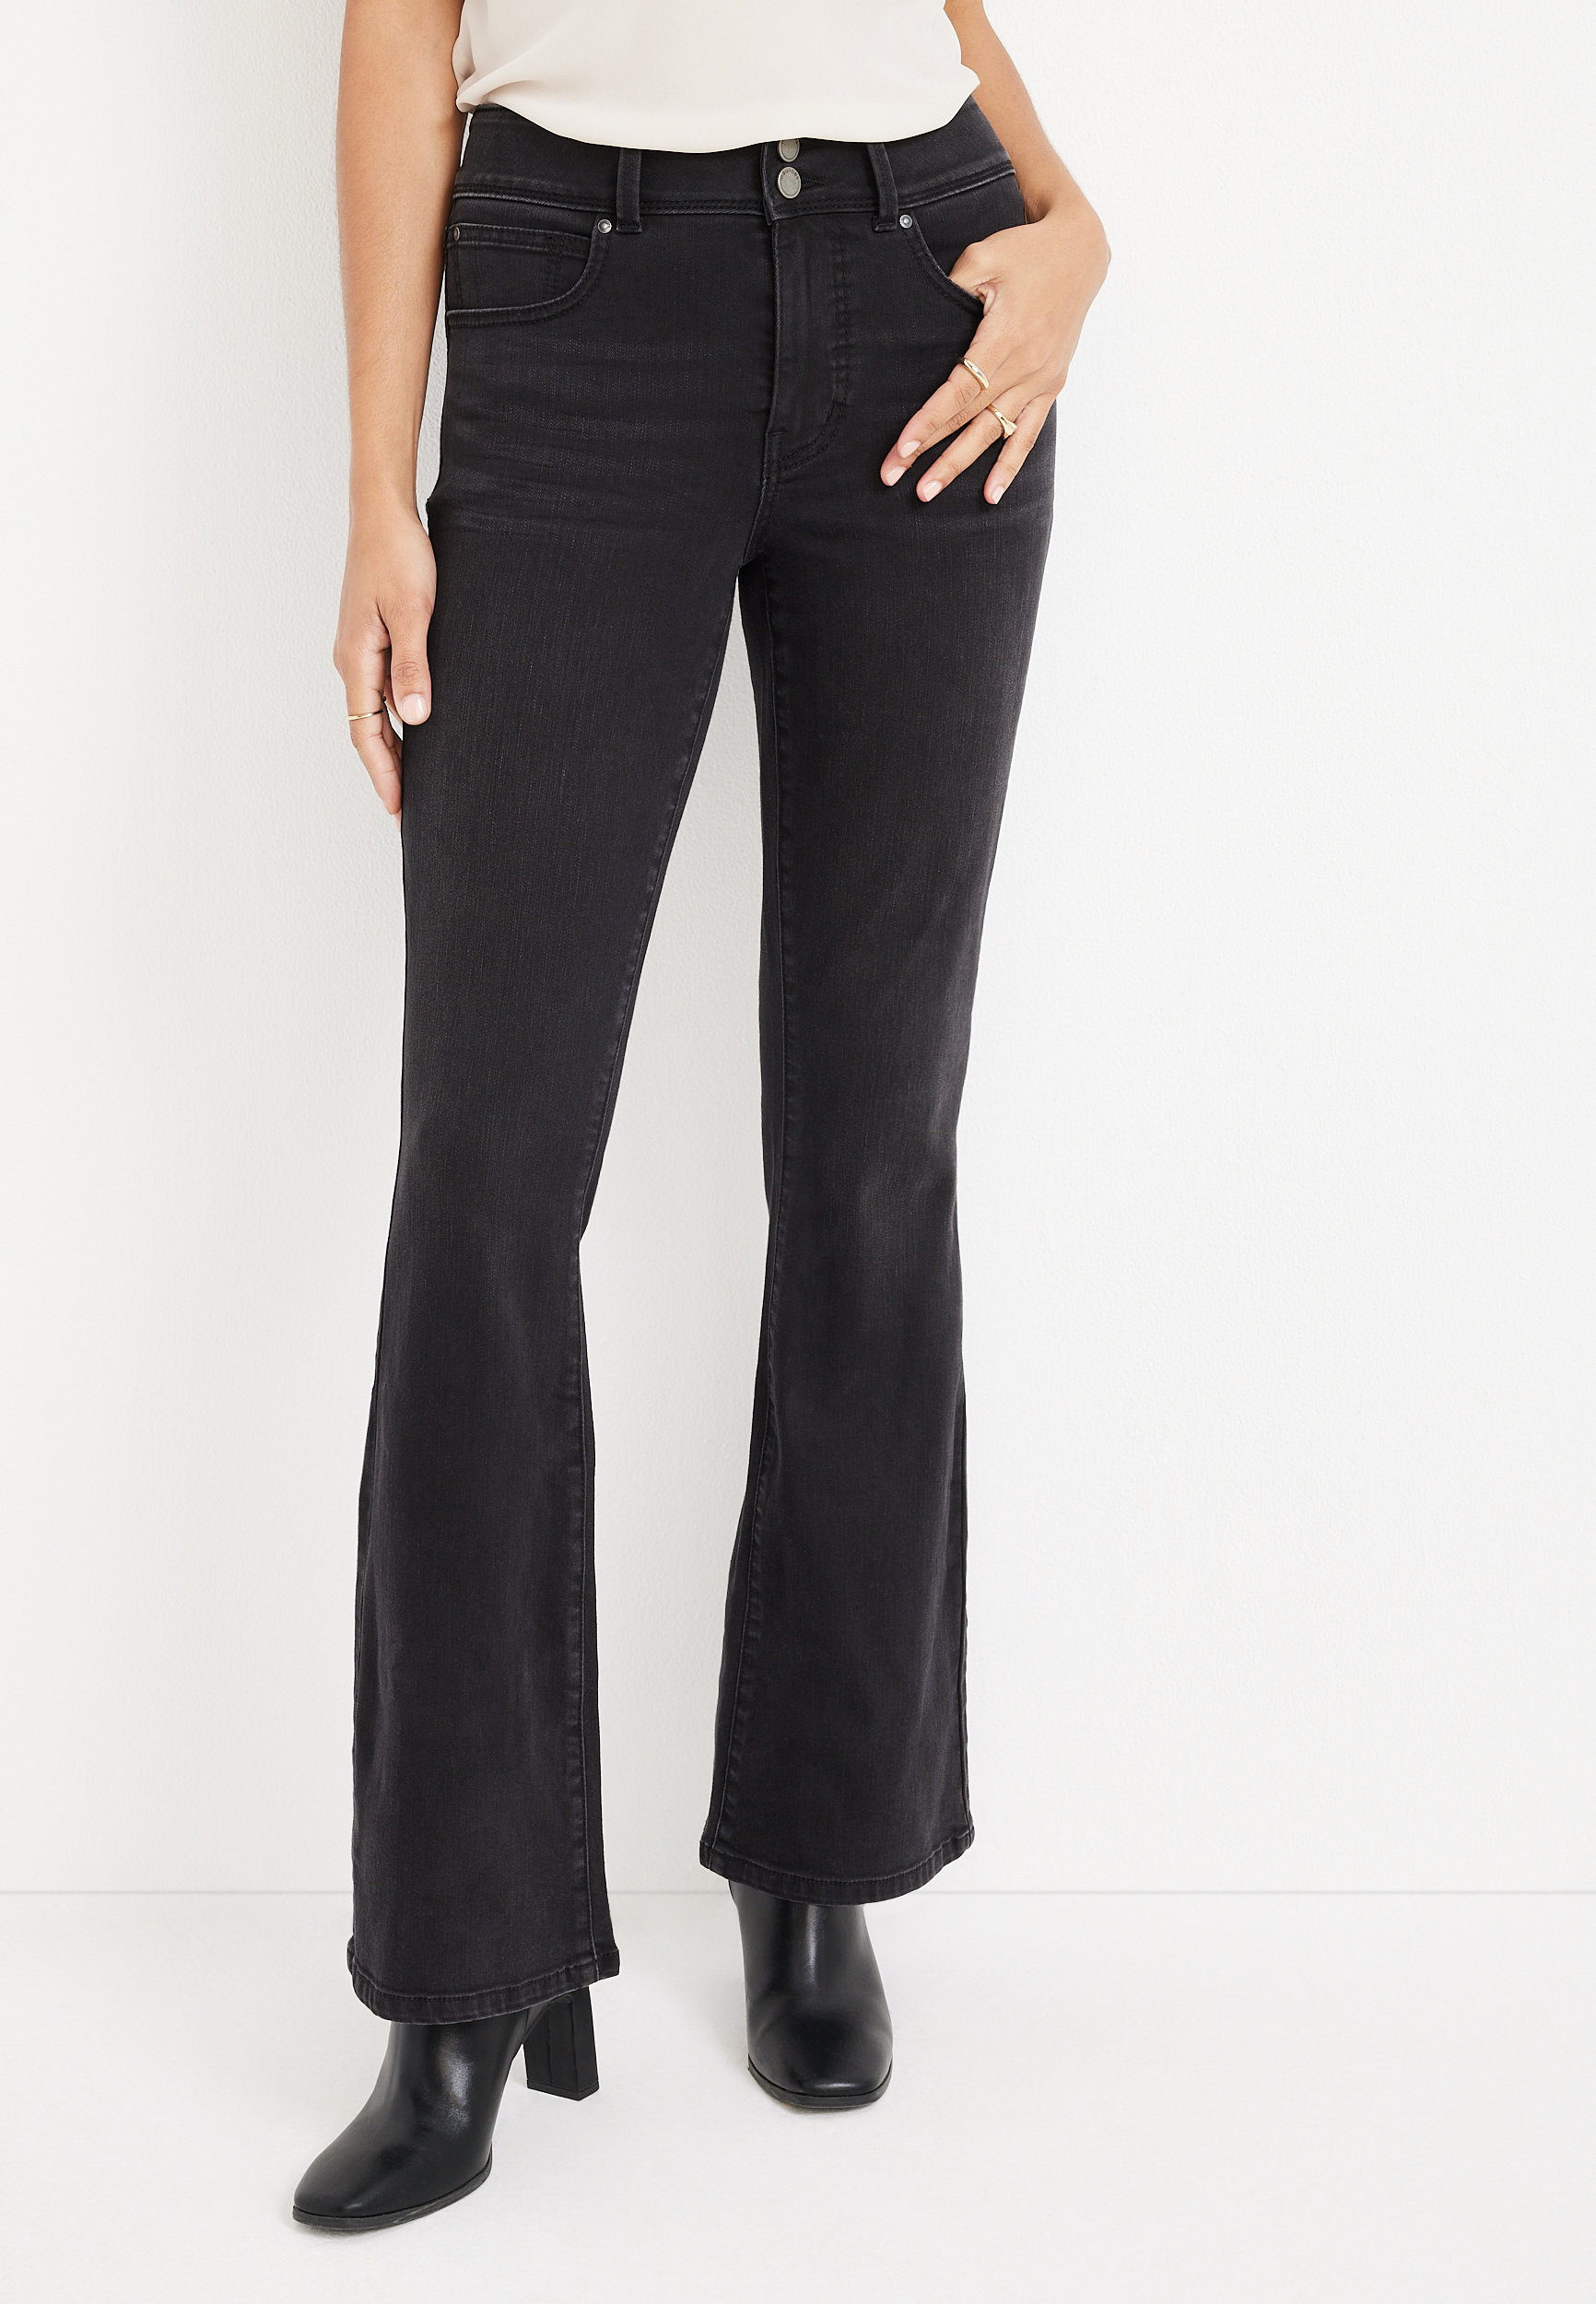 m jeans by maurices™ Everflex™ Flare Black Mid Rise Jean | maurices